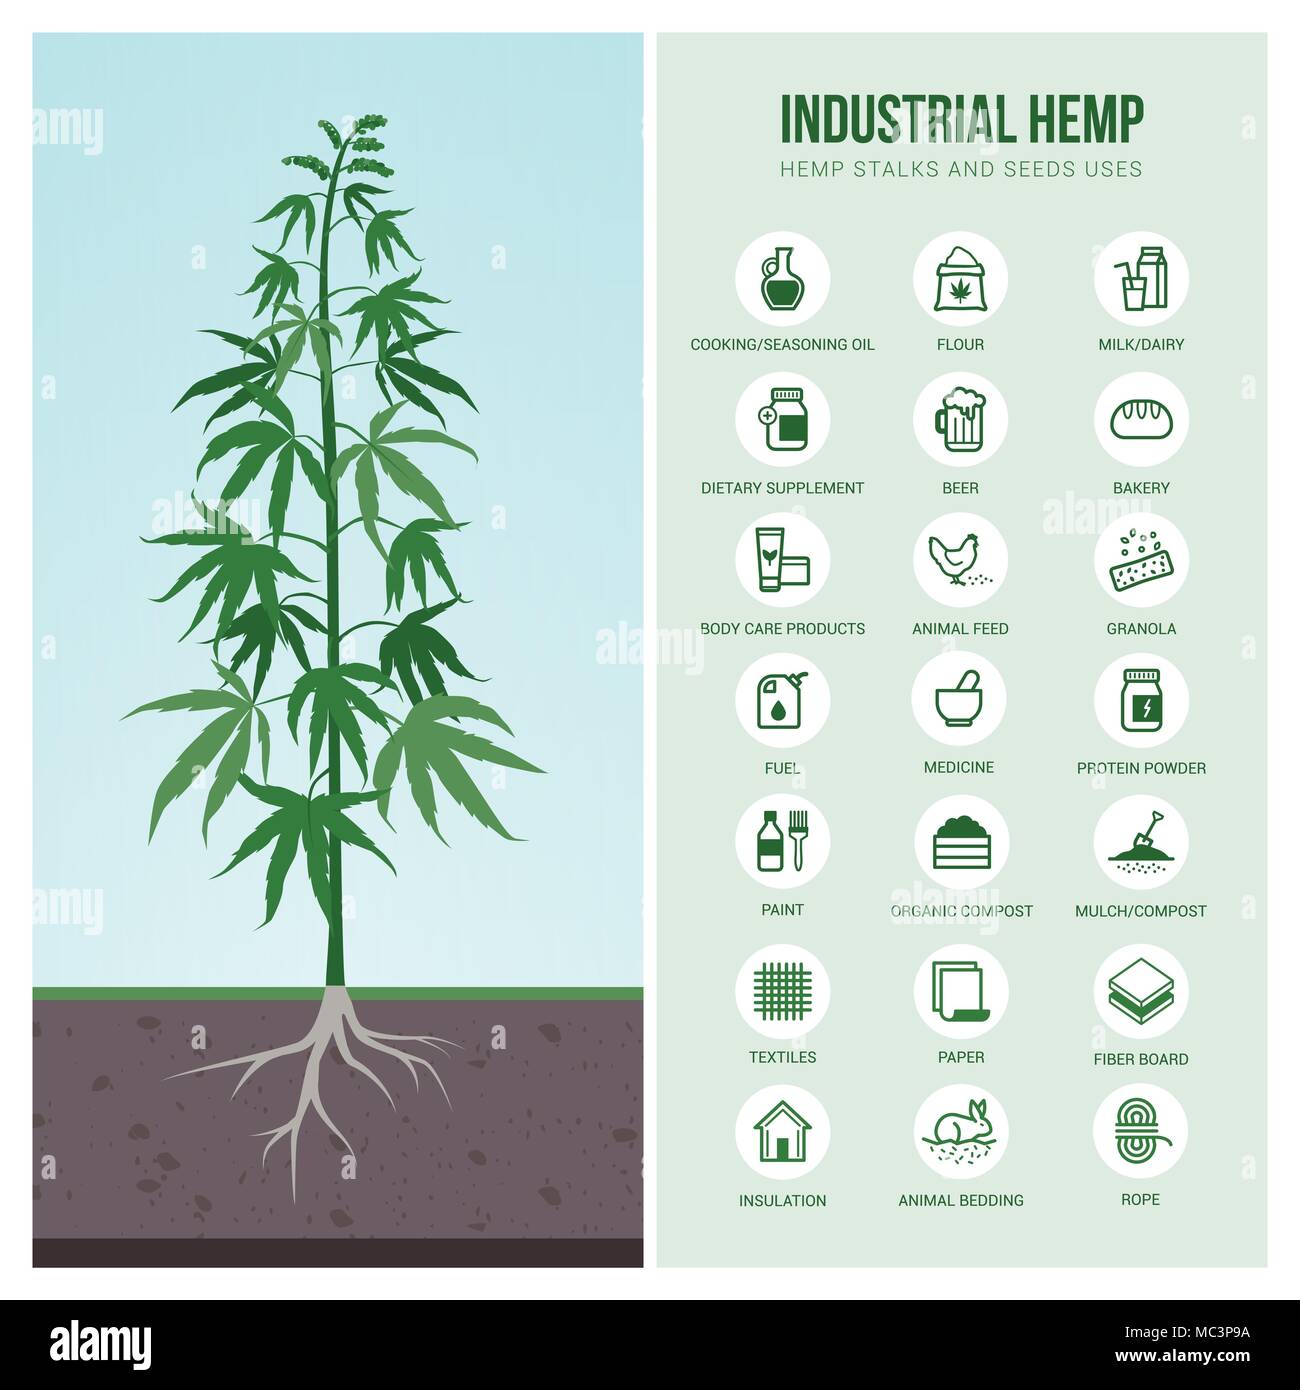 Industrial hemp cultivation, products and uses, vector infographic with icons Stock Vector